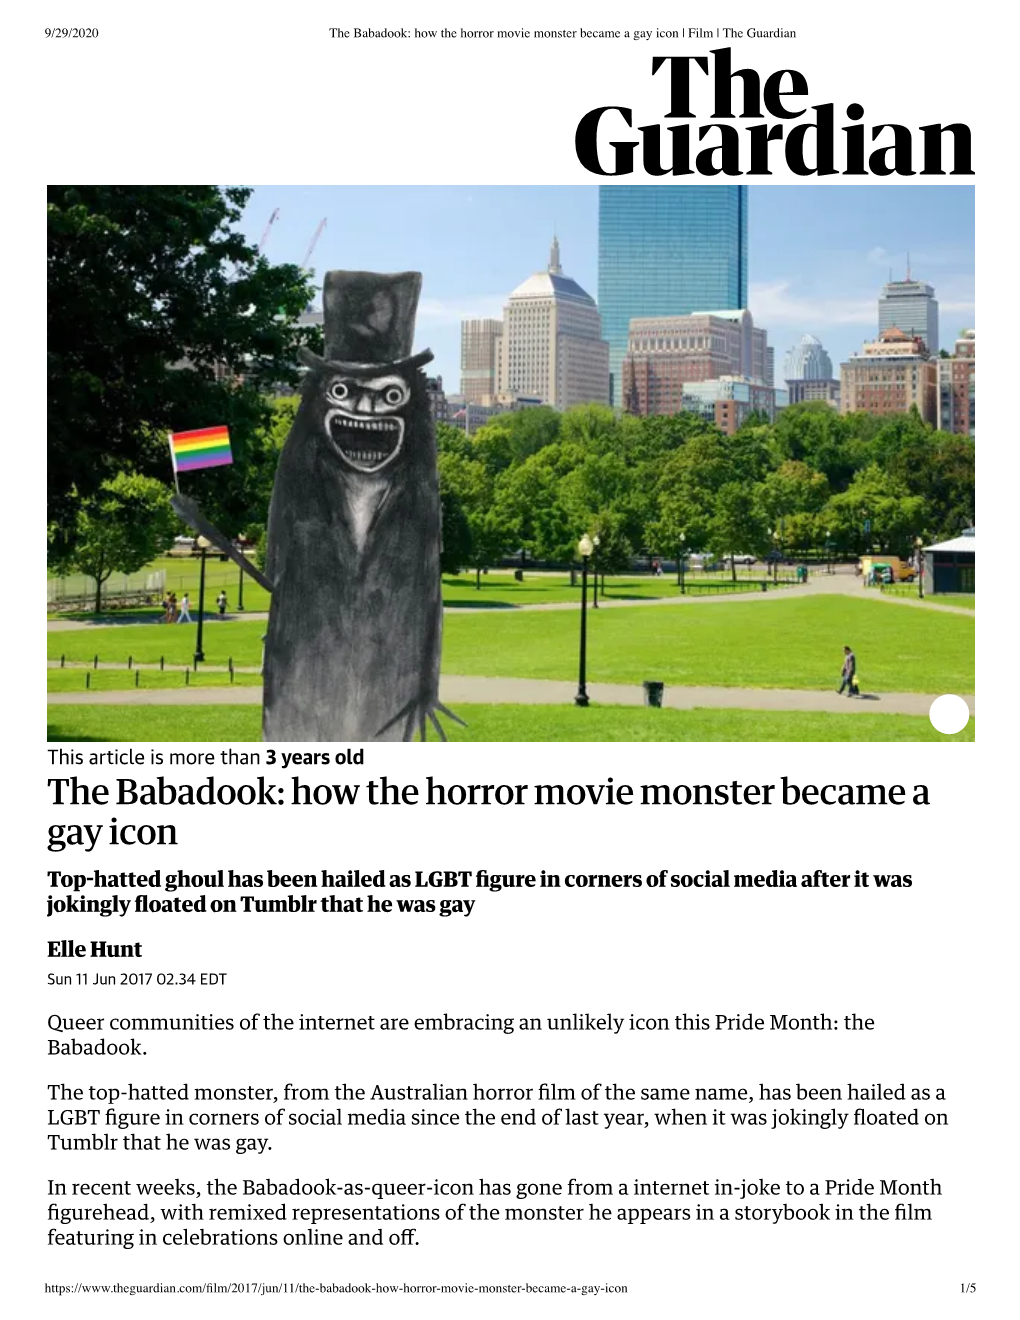 How the Horror Movie Monster Became a Gay Icon | Film | the Guardian